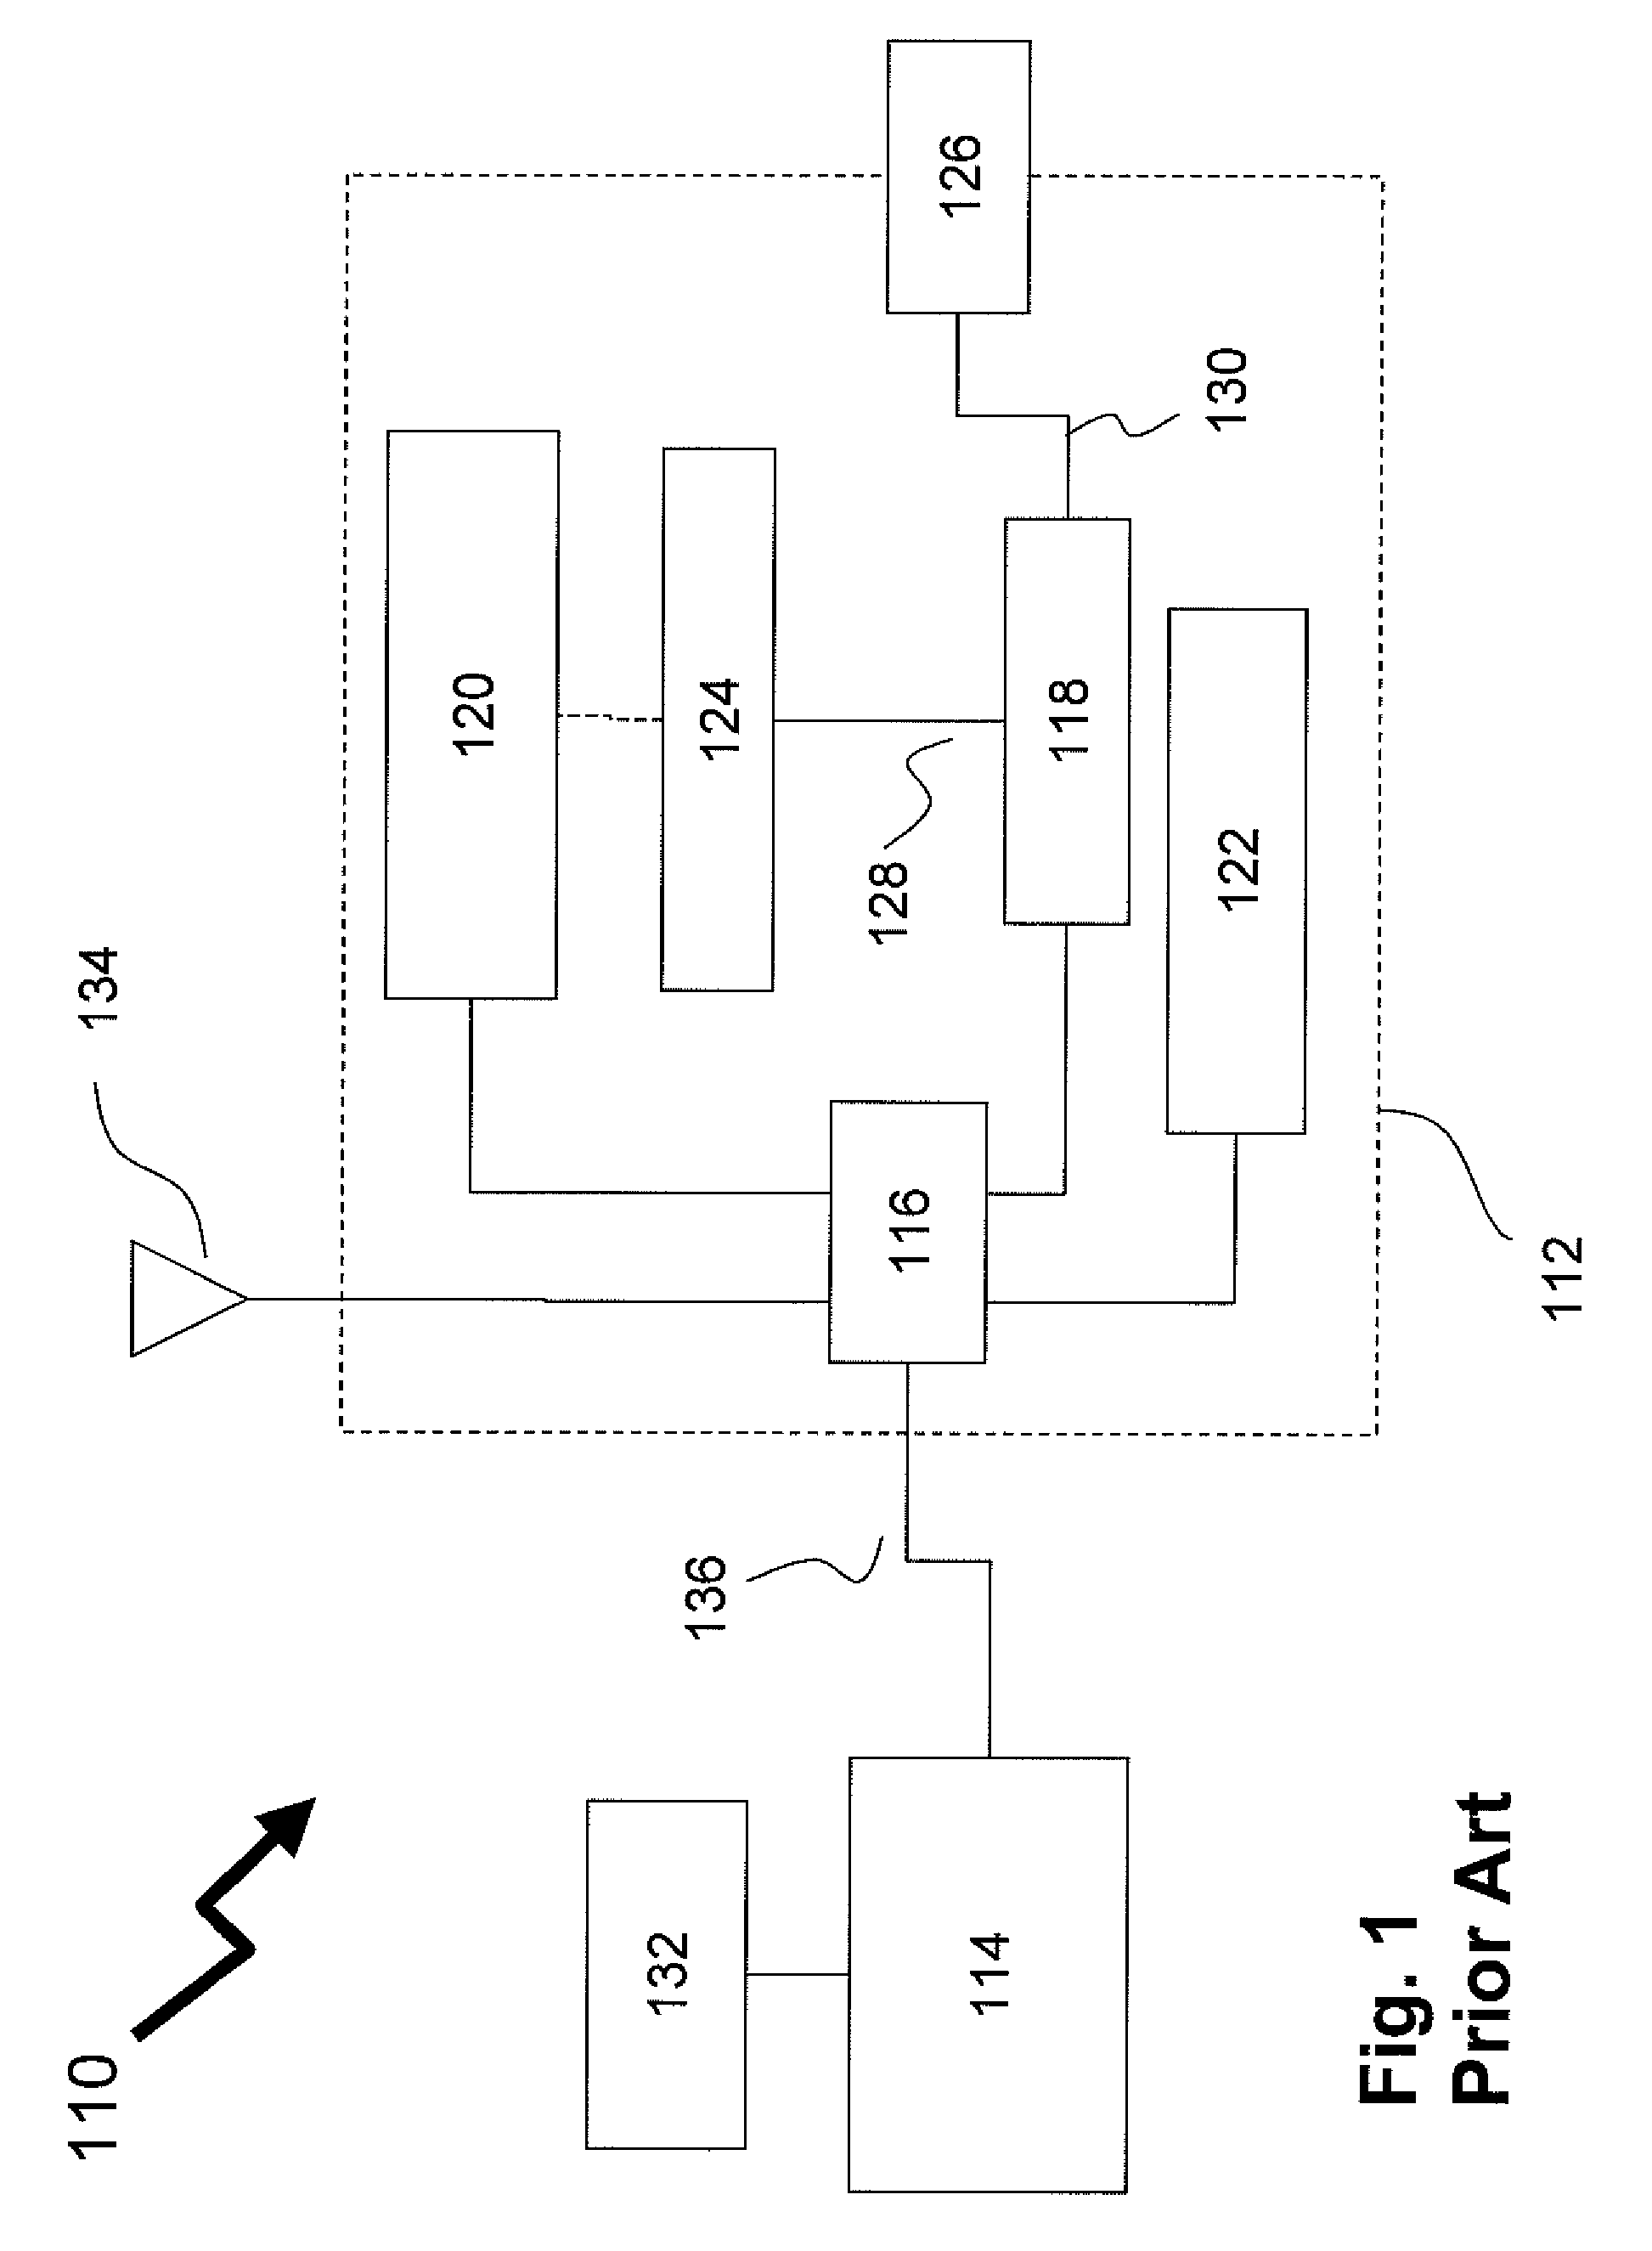 Method of providing assured transactions by watermarked file display verification